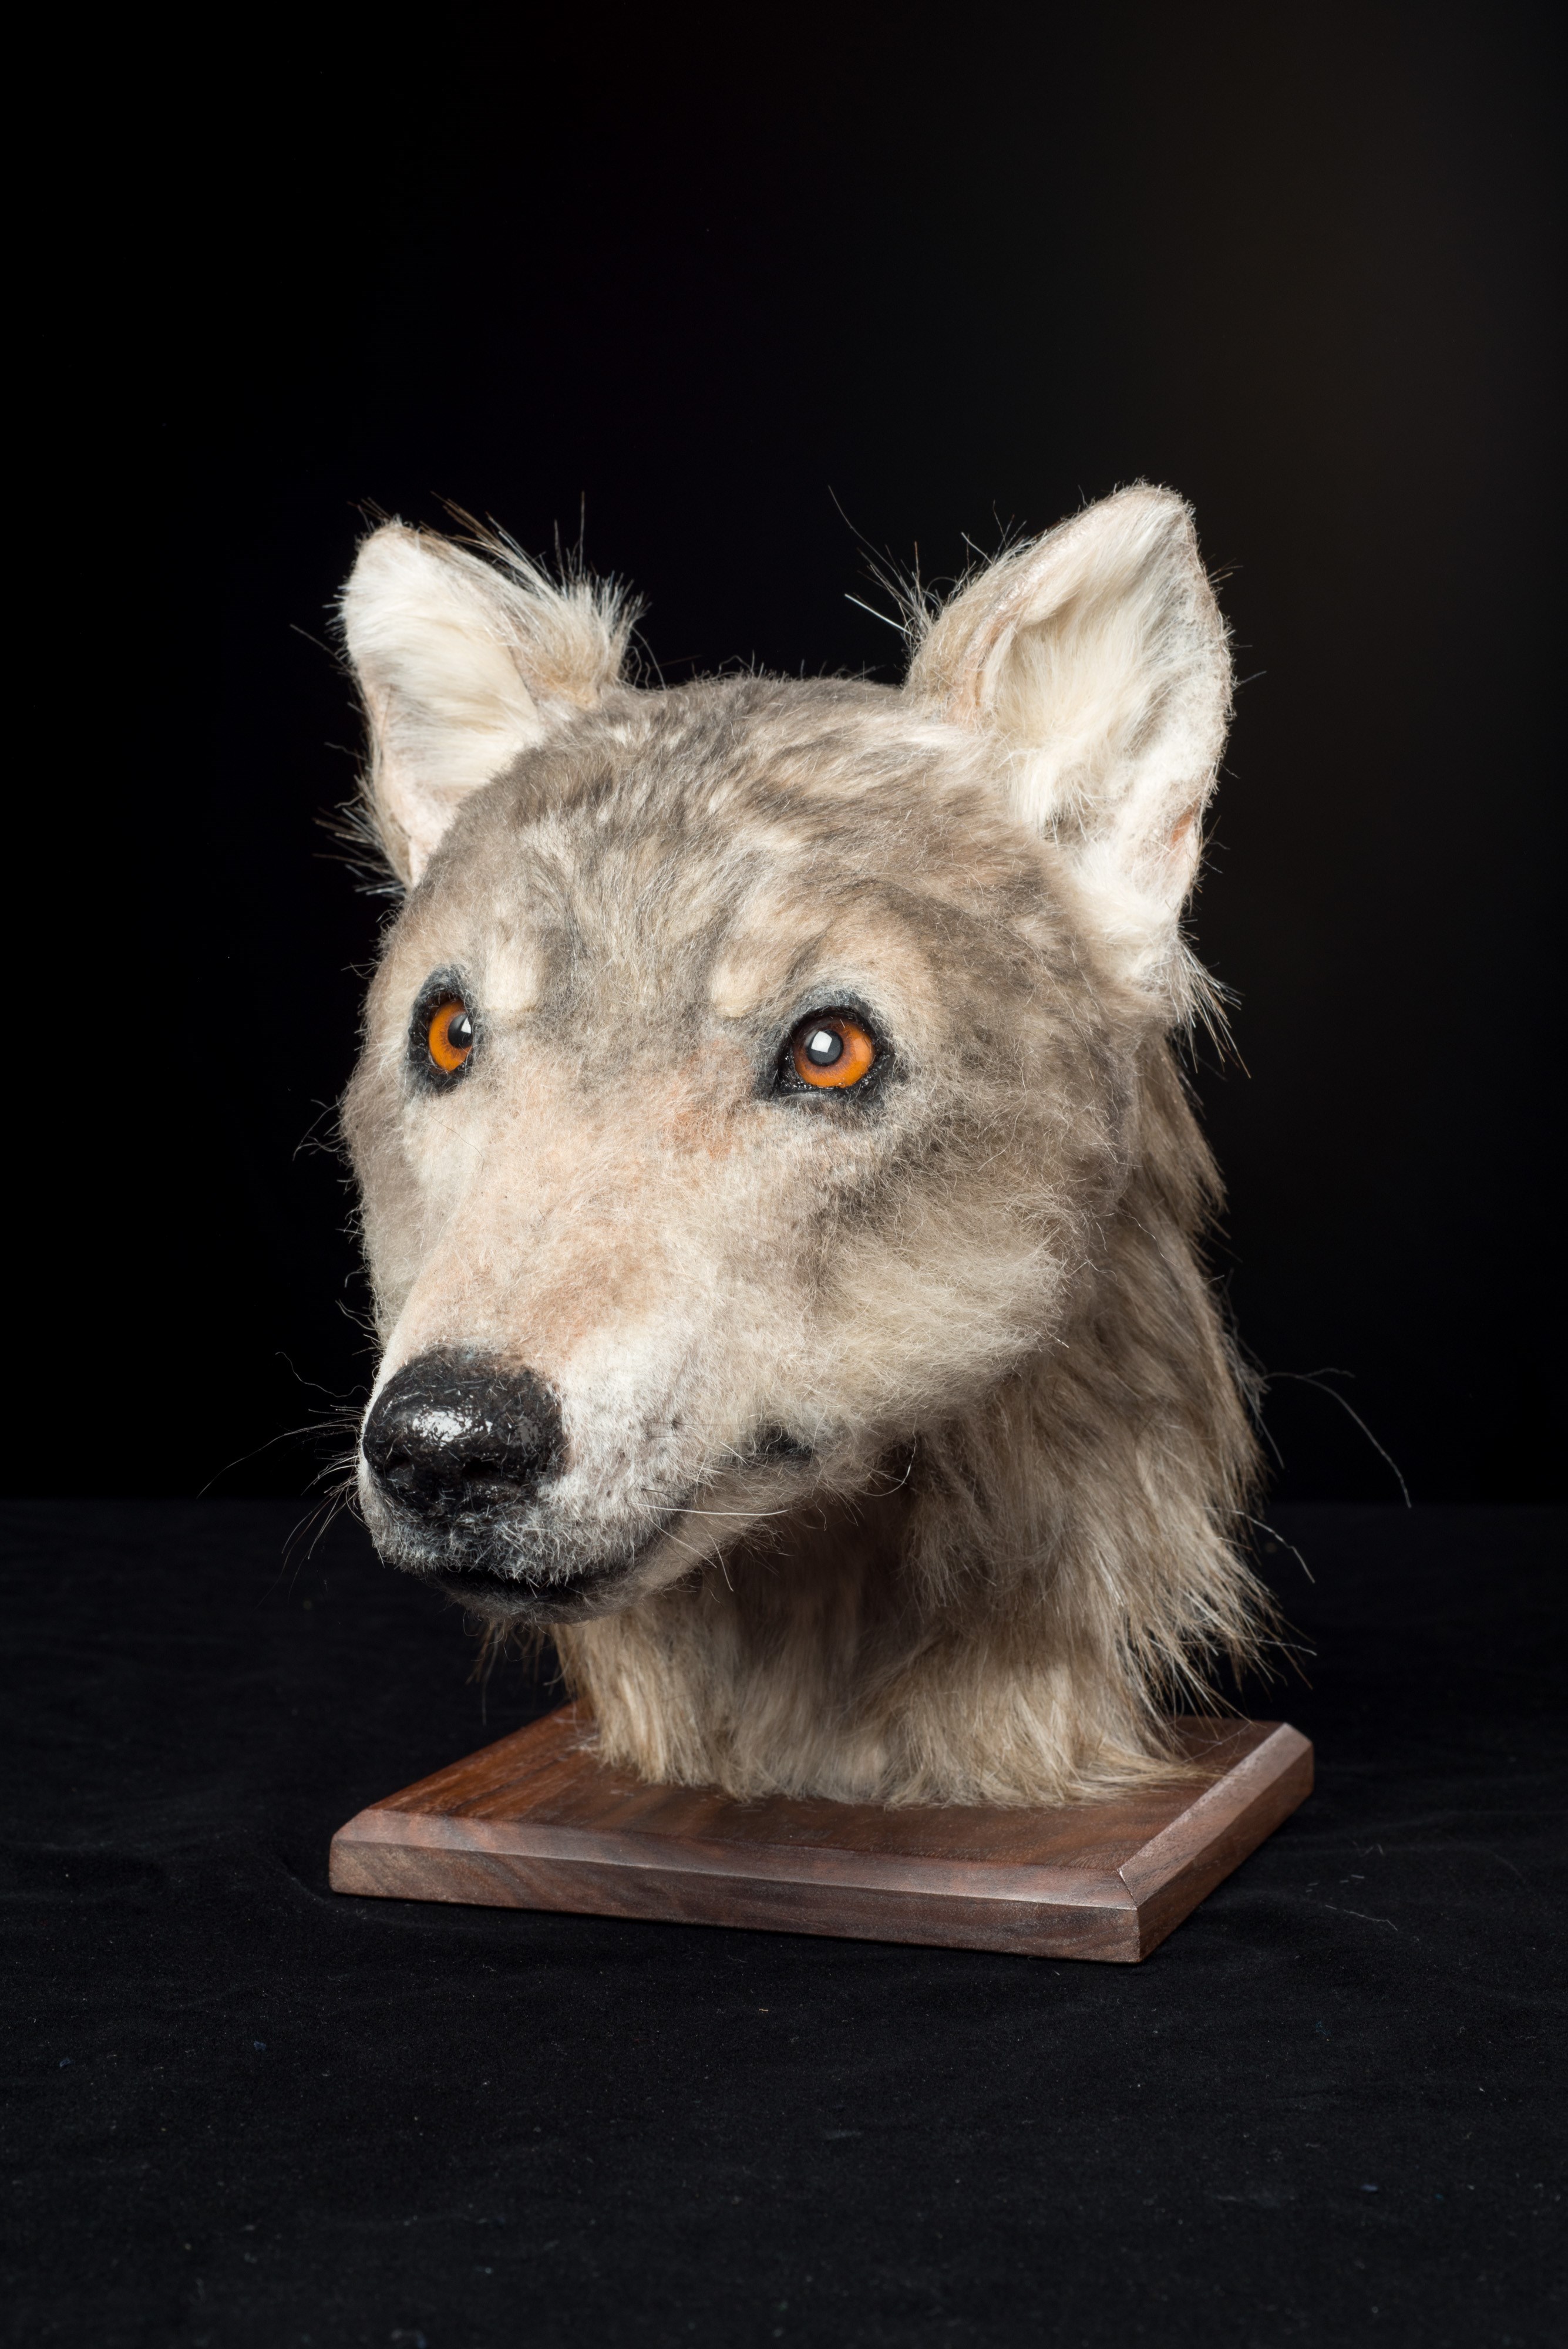 The completed reconstruction. Although it would have been a domesticated dog, its features are reminiscent of the European grey wolf.